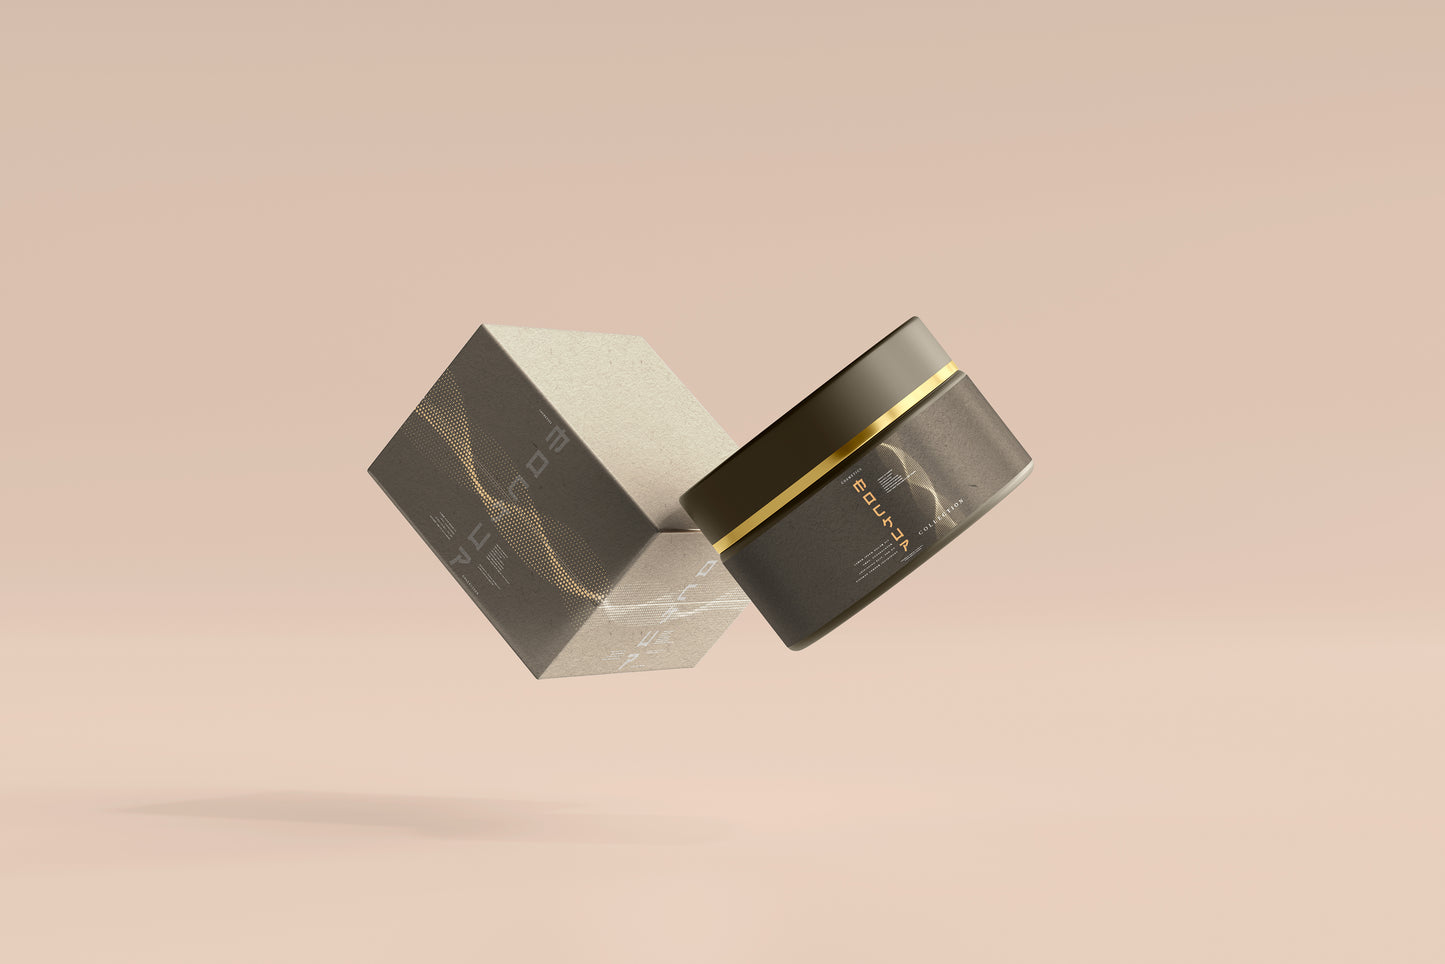 Cosmetic Branding Mockup Collection